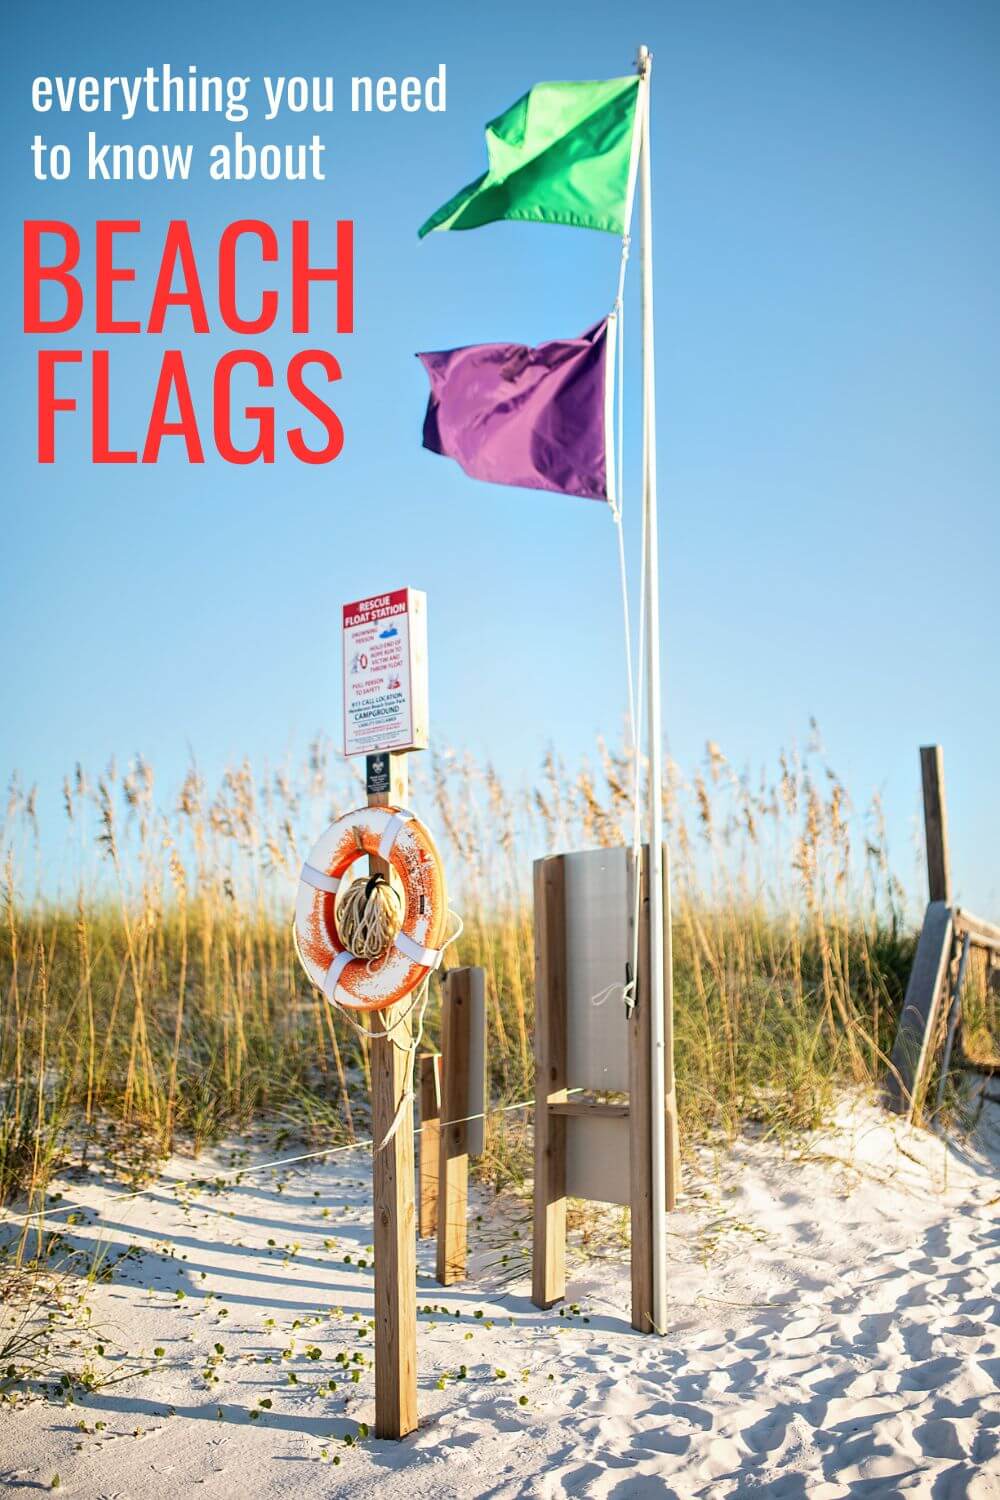 Everything you need to know about beach flags